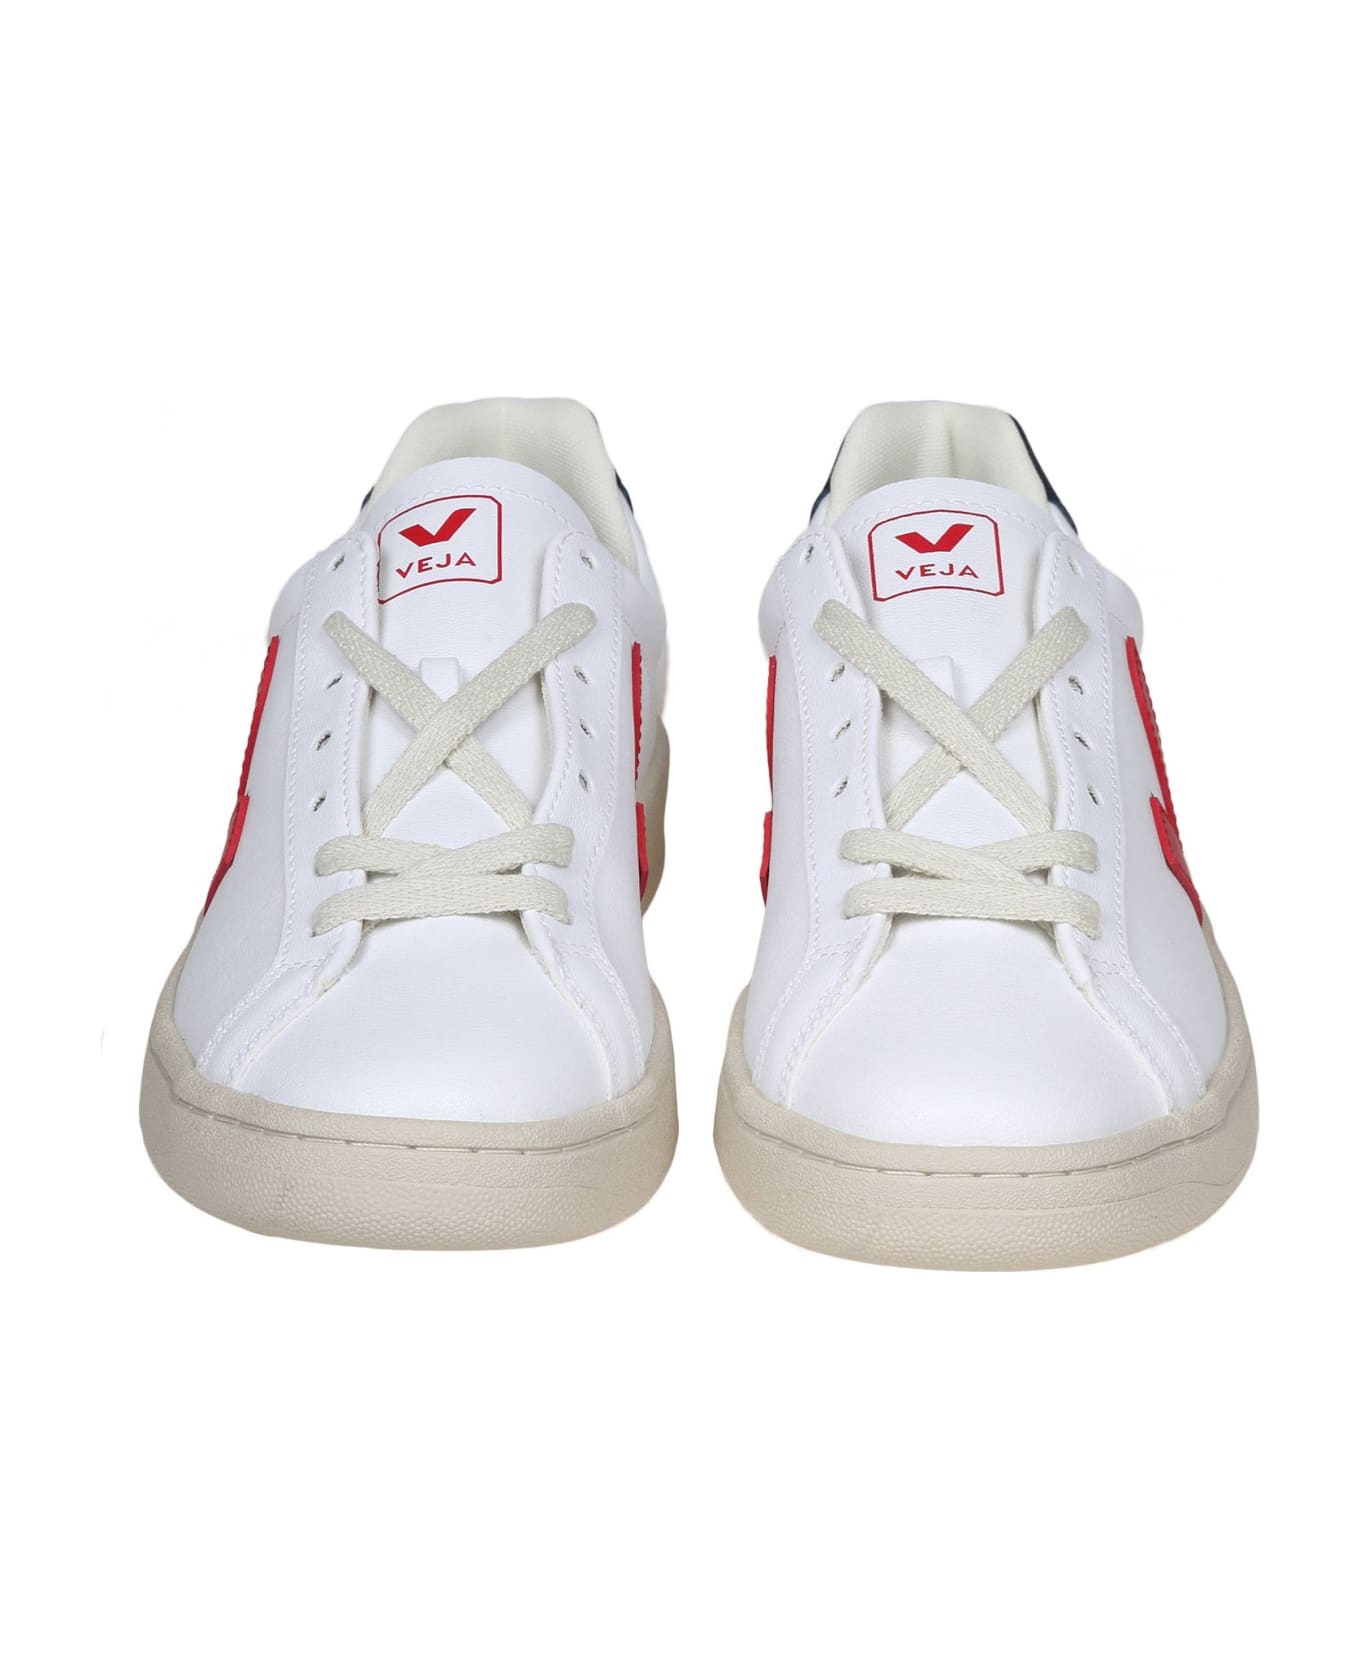 Veja Campo Chromefree In White/red Leather - White/red